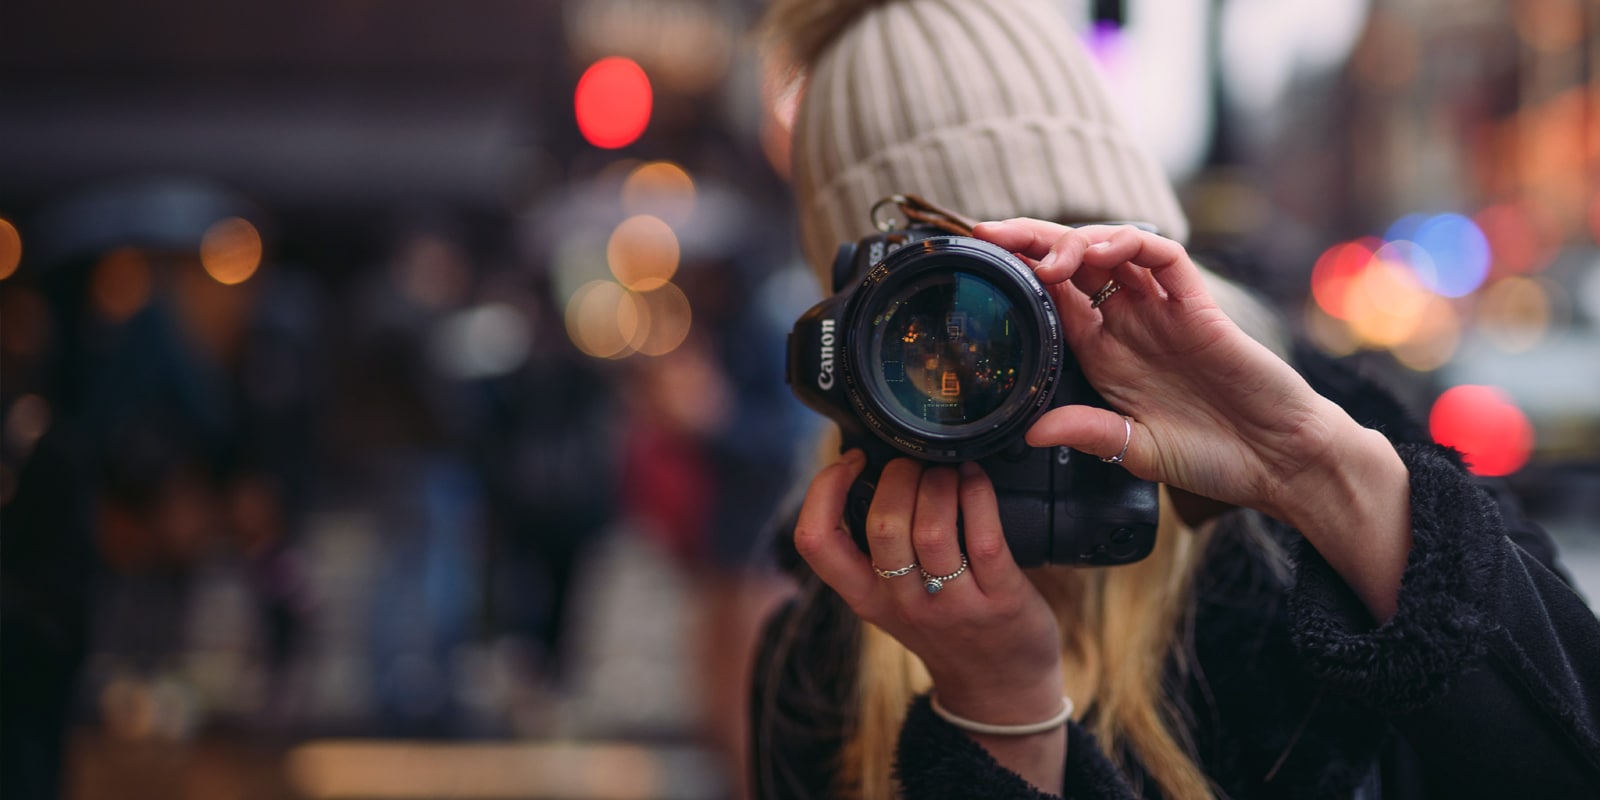 An image of a woman taking a picture with a camera